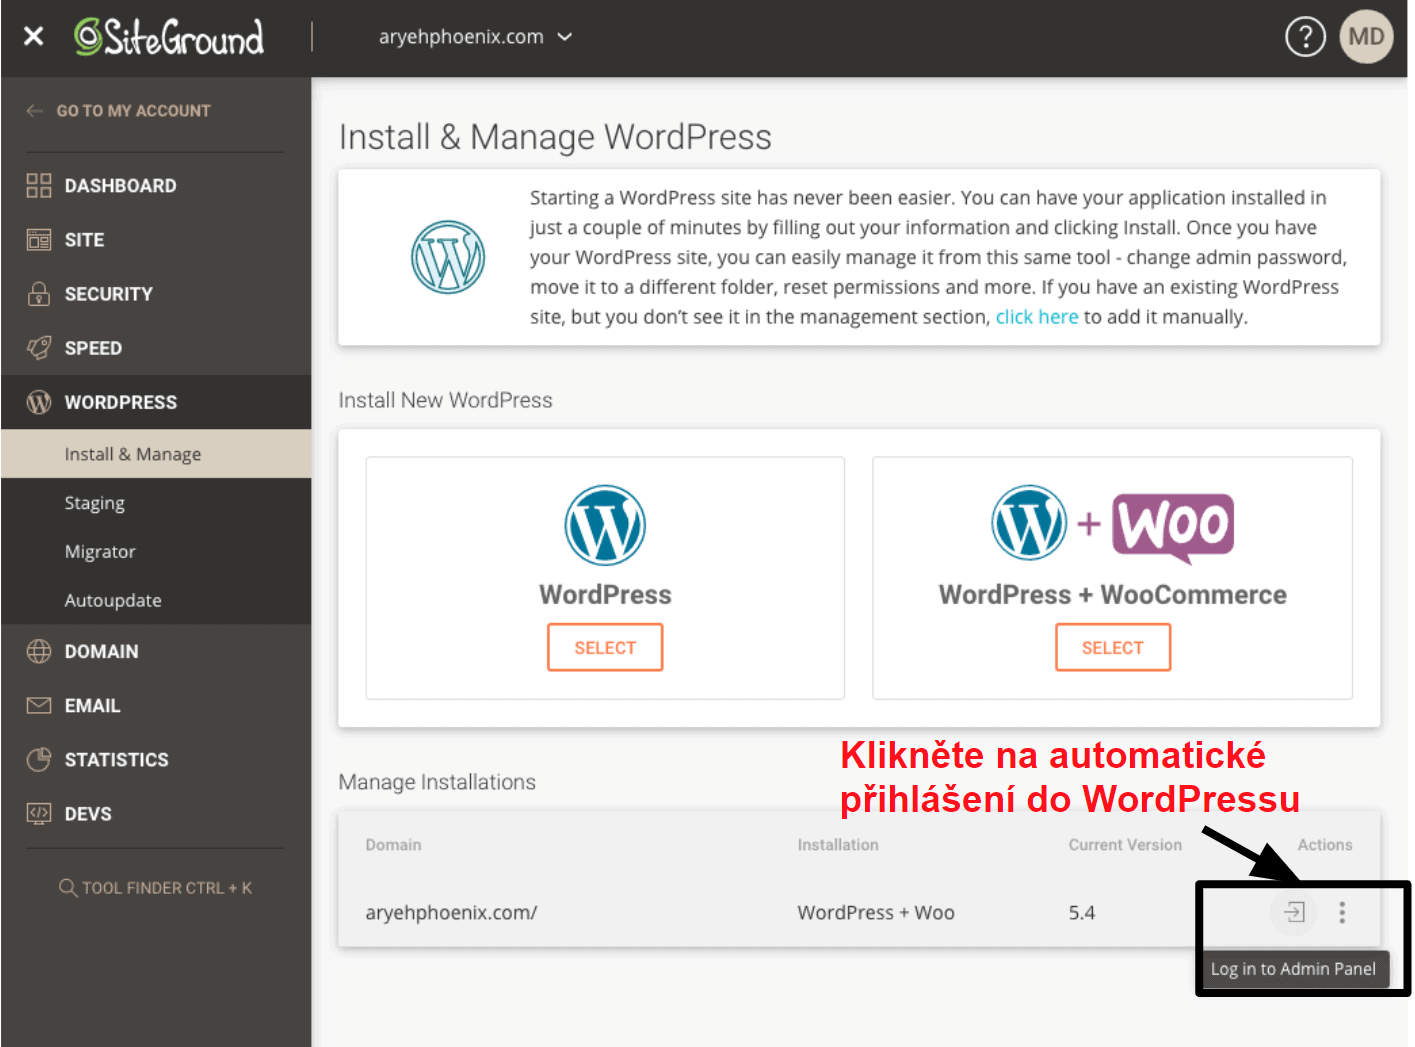 SiteGround offers a one click login option for your WordPress dashboard CZ15